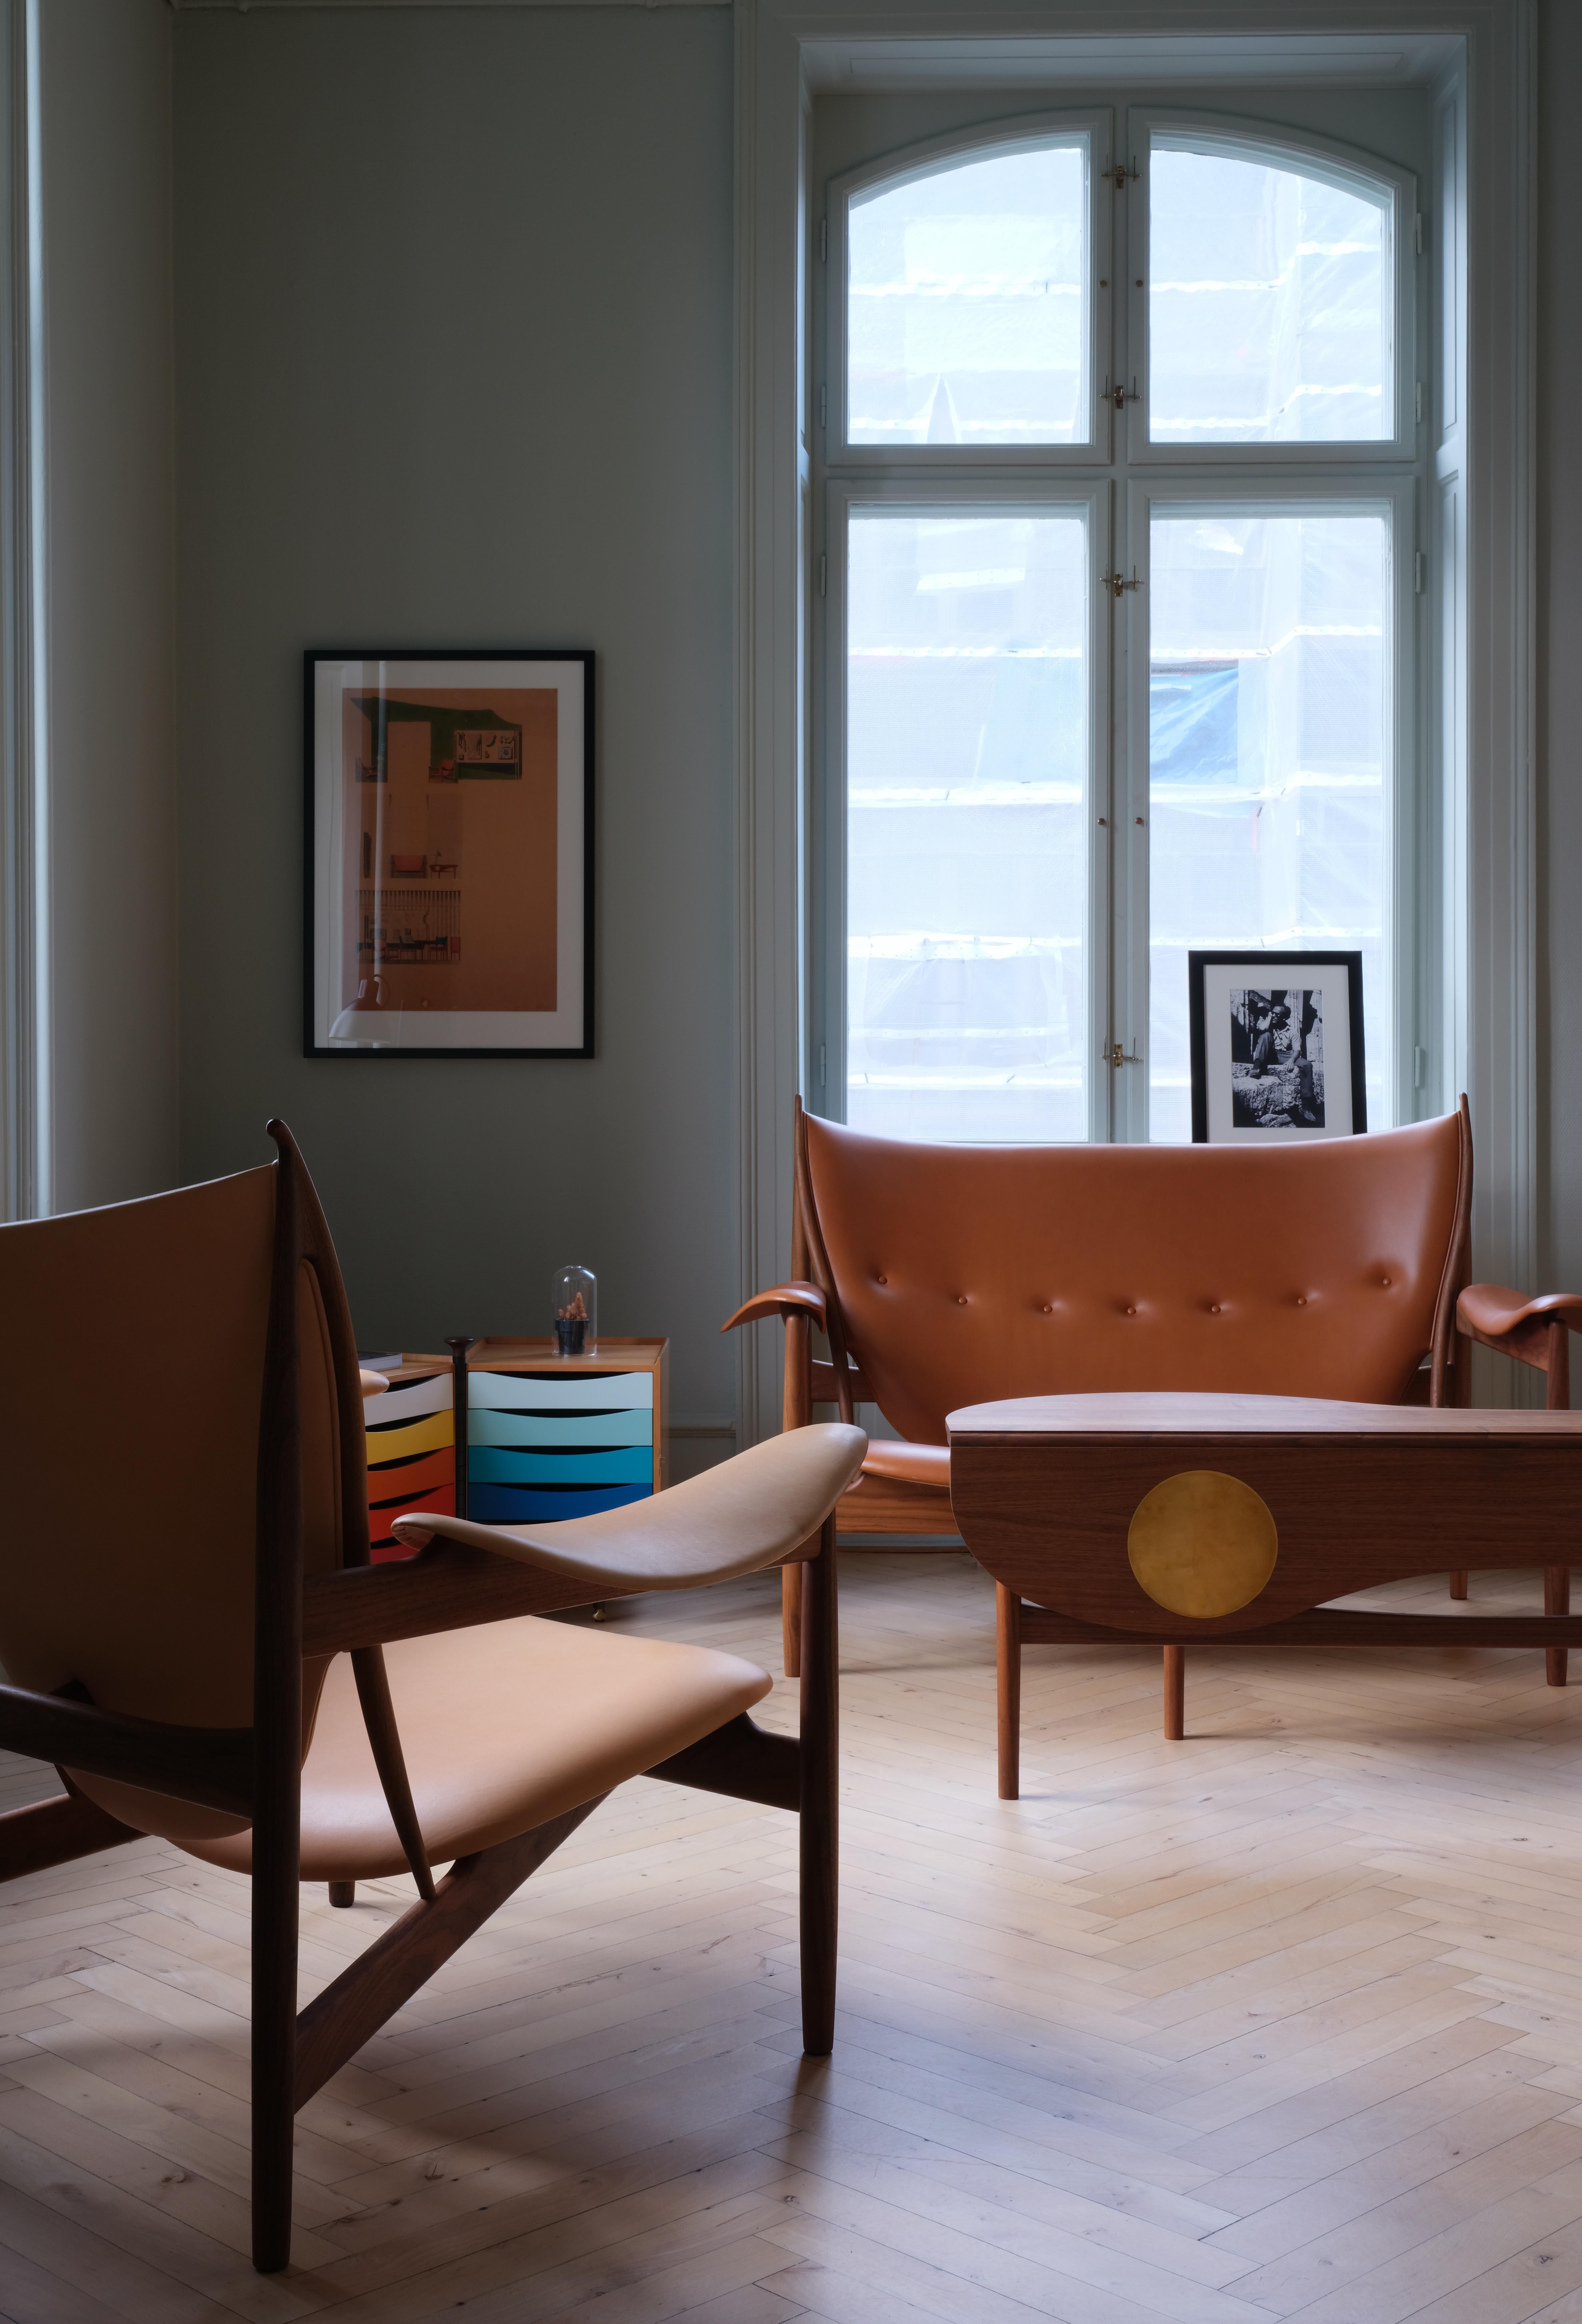 Sofa designed by Finn Juhl in 1949, relaunched in 2013.
Manufactured by House of Finn Juhl in Denmark.

Alongside the impressive Chieftain Chair, Finn Juhl and cabinetmaker Niels Vodder also introduced the Chieftain Sofa in 1949.

While the